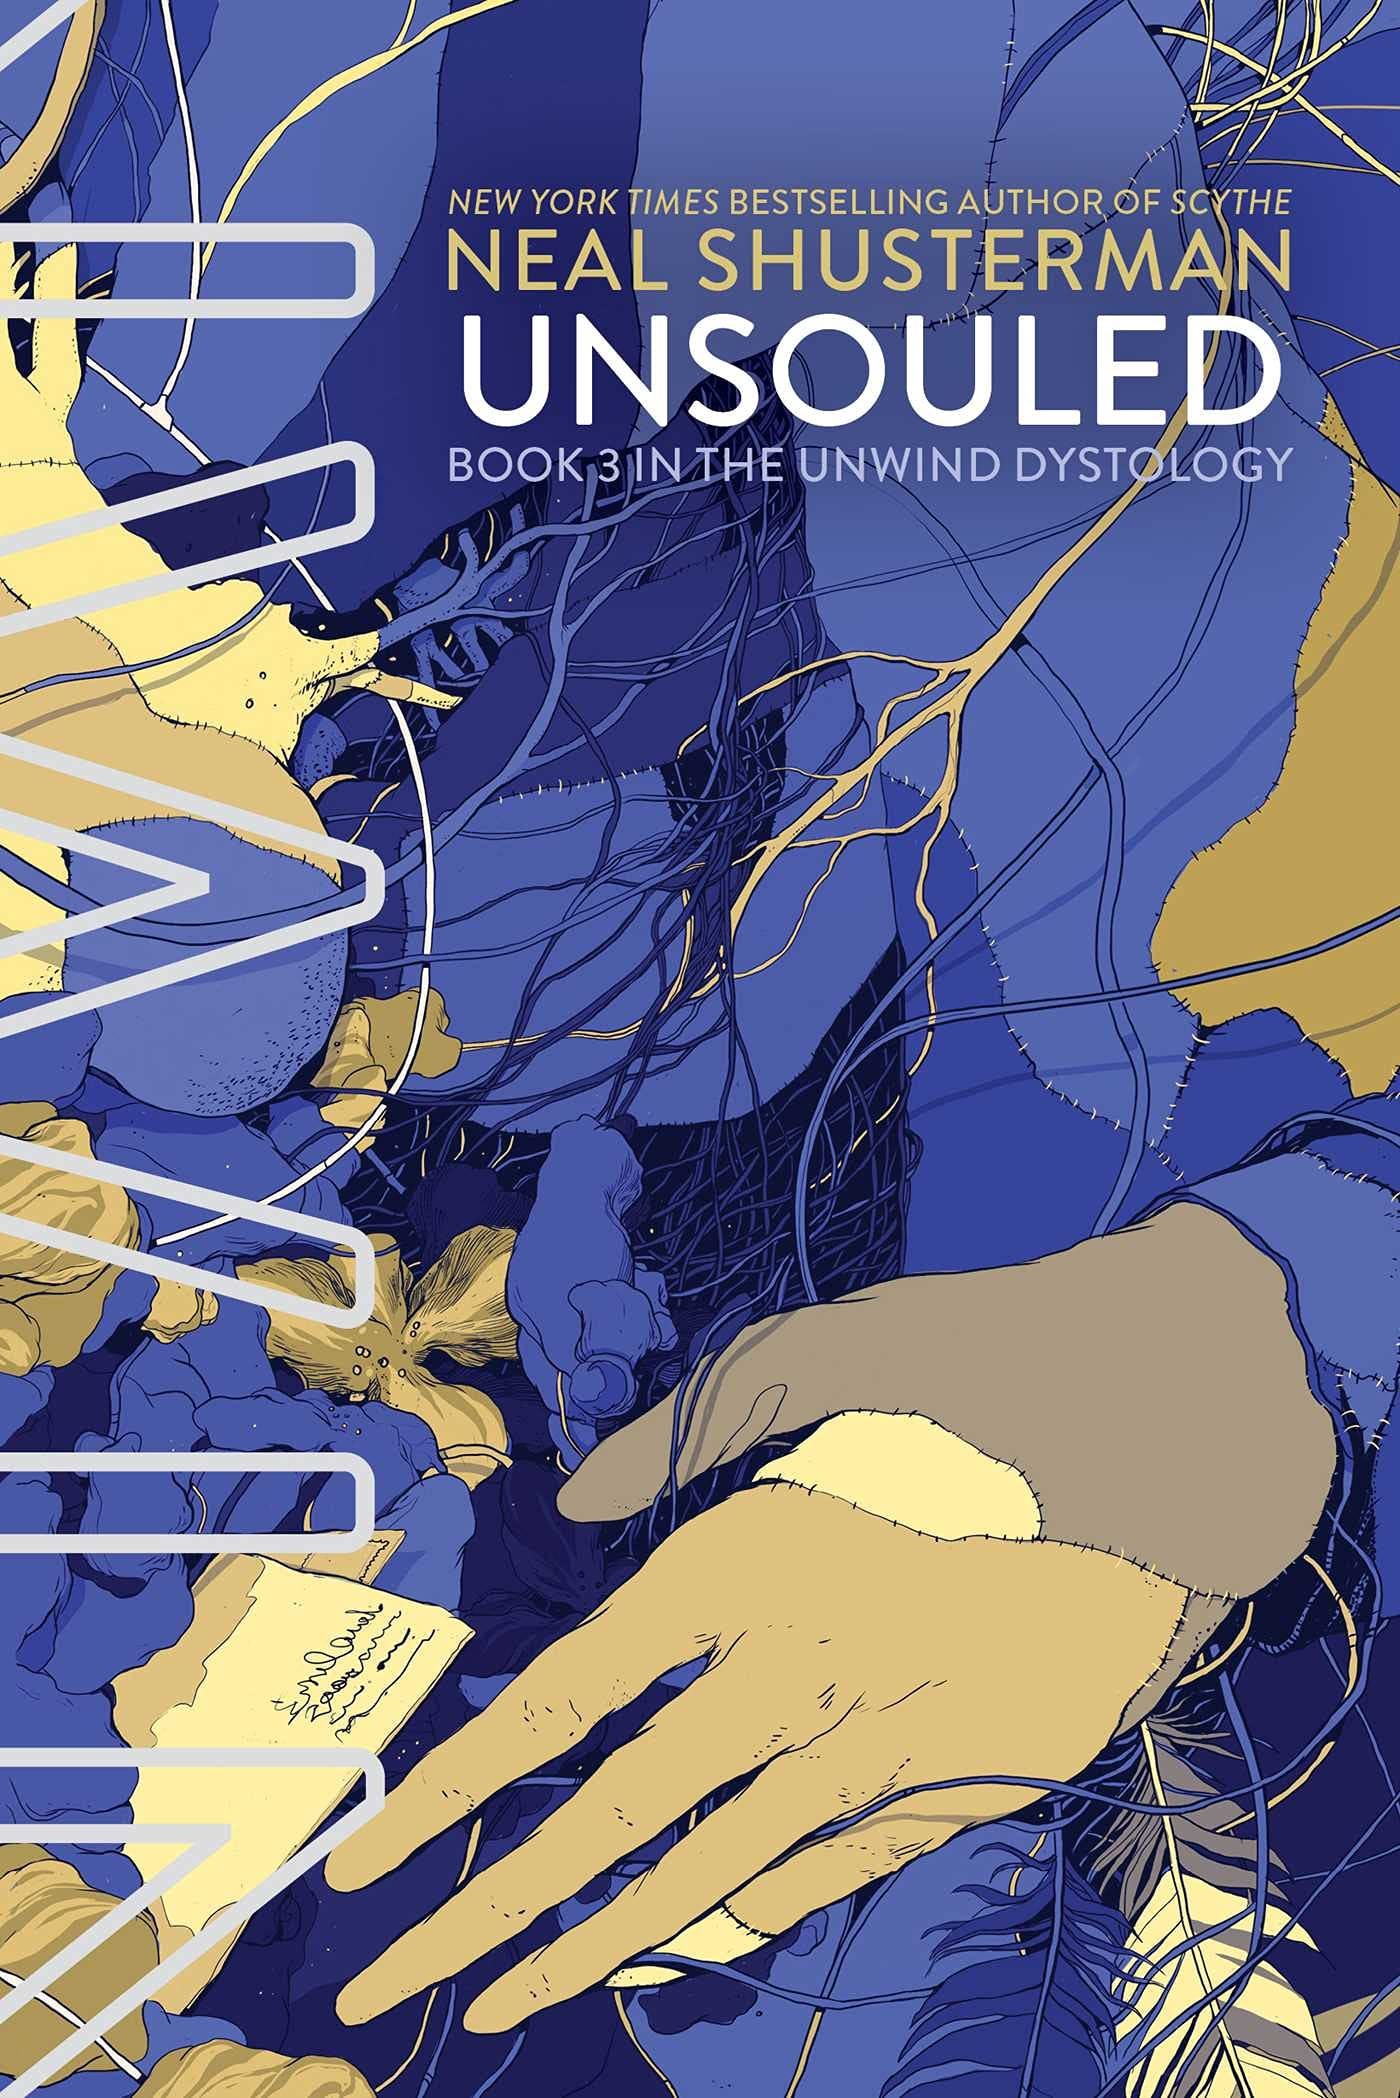 UnSouled (Book #3 of the Unwind Dystology) by Neal Shusterman